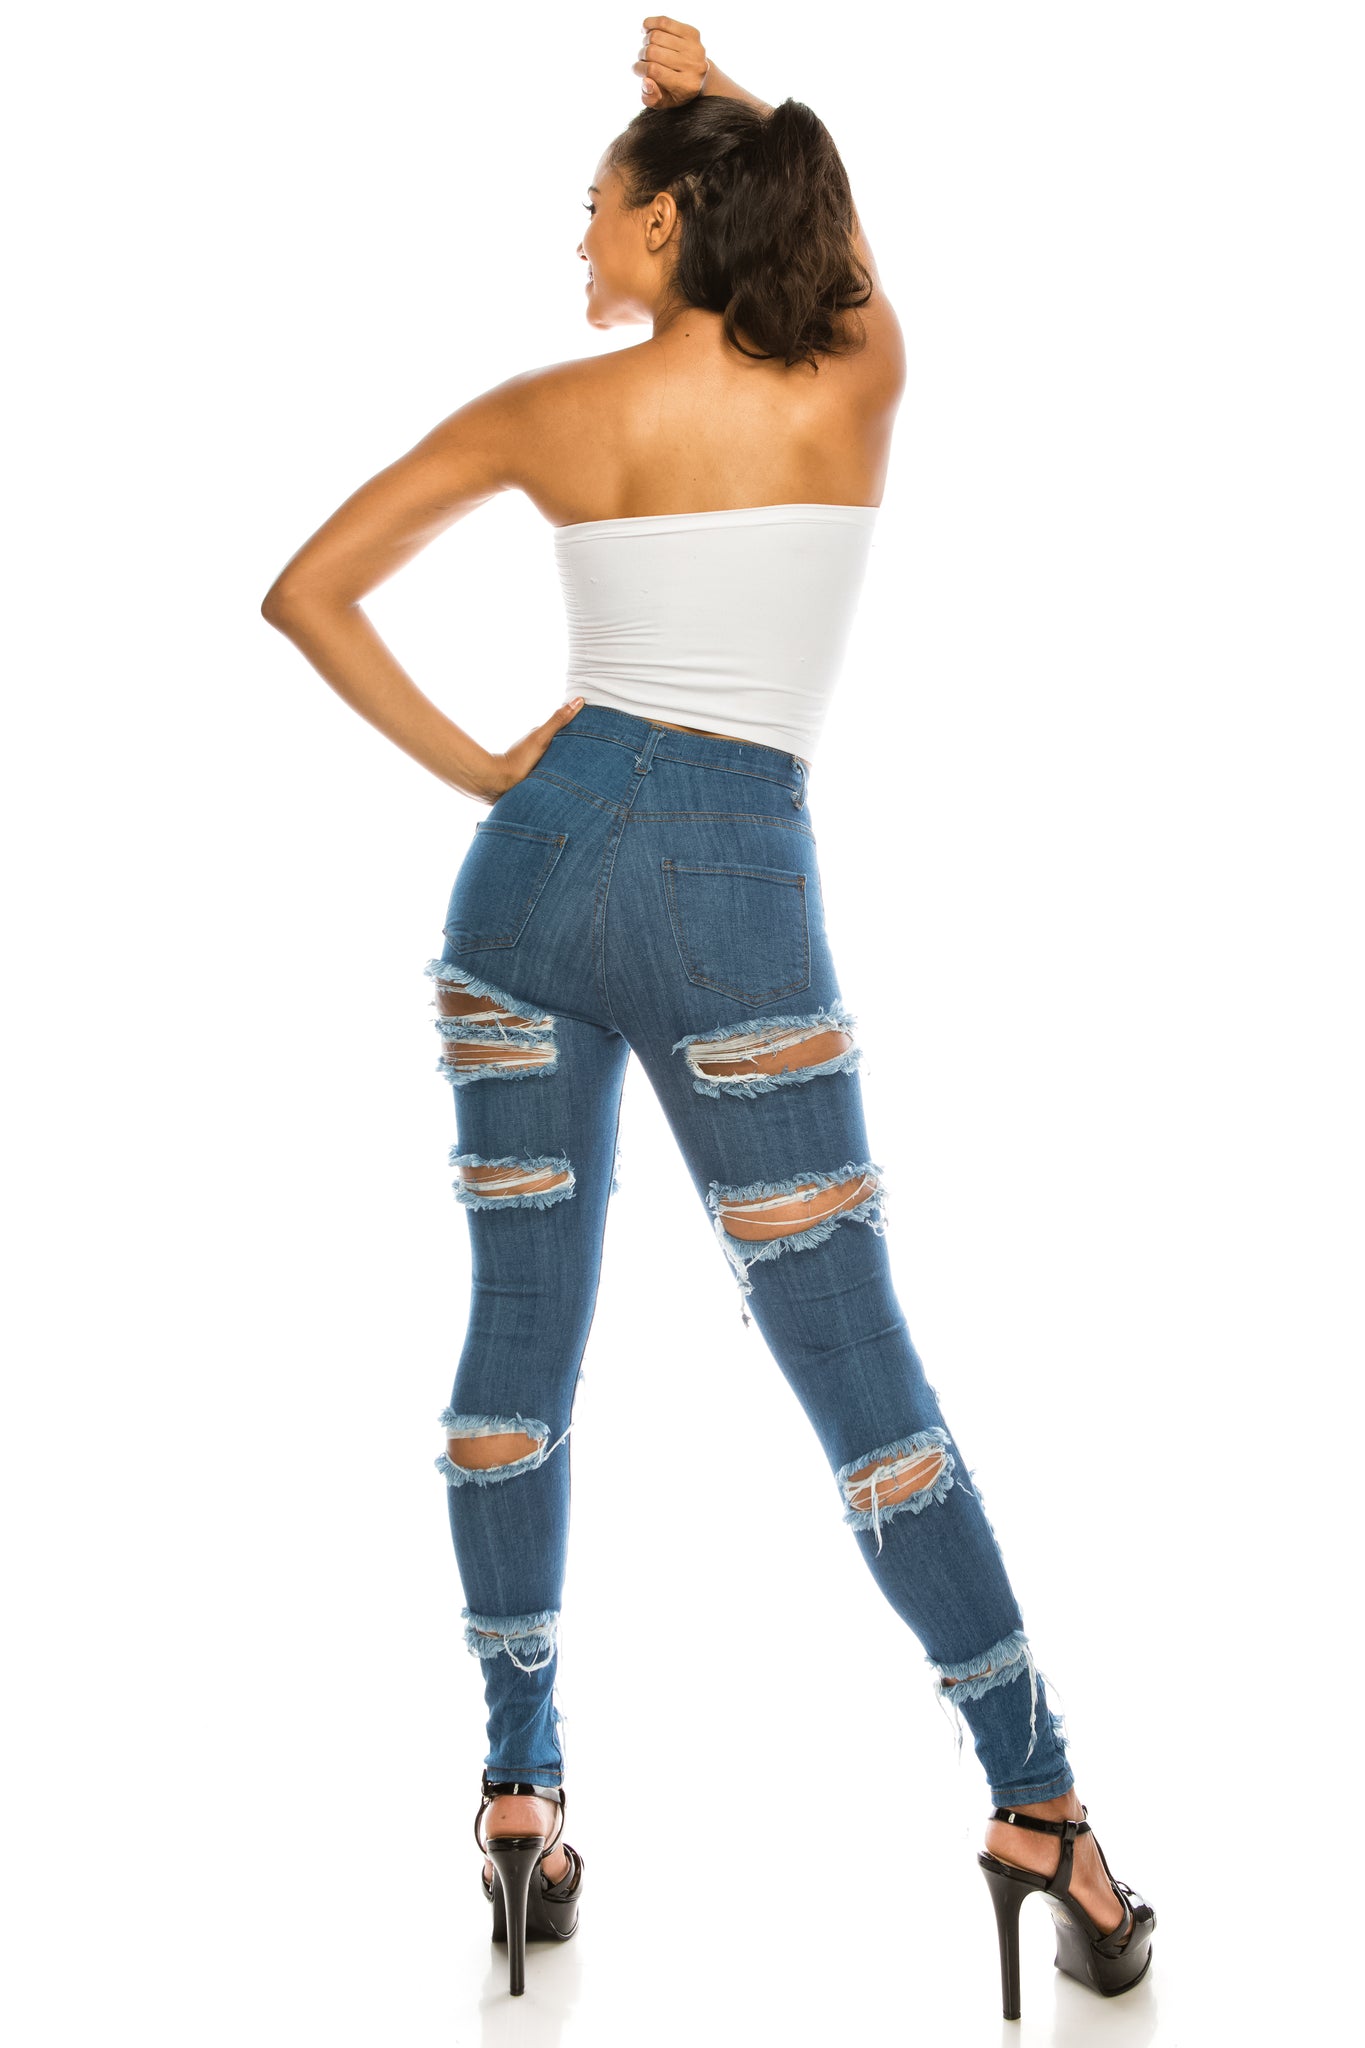 Super High Waisted Distressed Skinny Jeans – Aphrodite Jeans